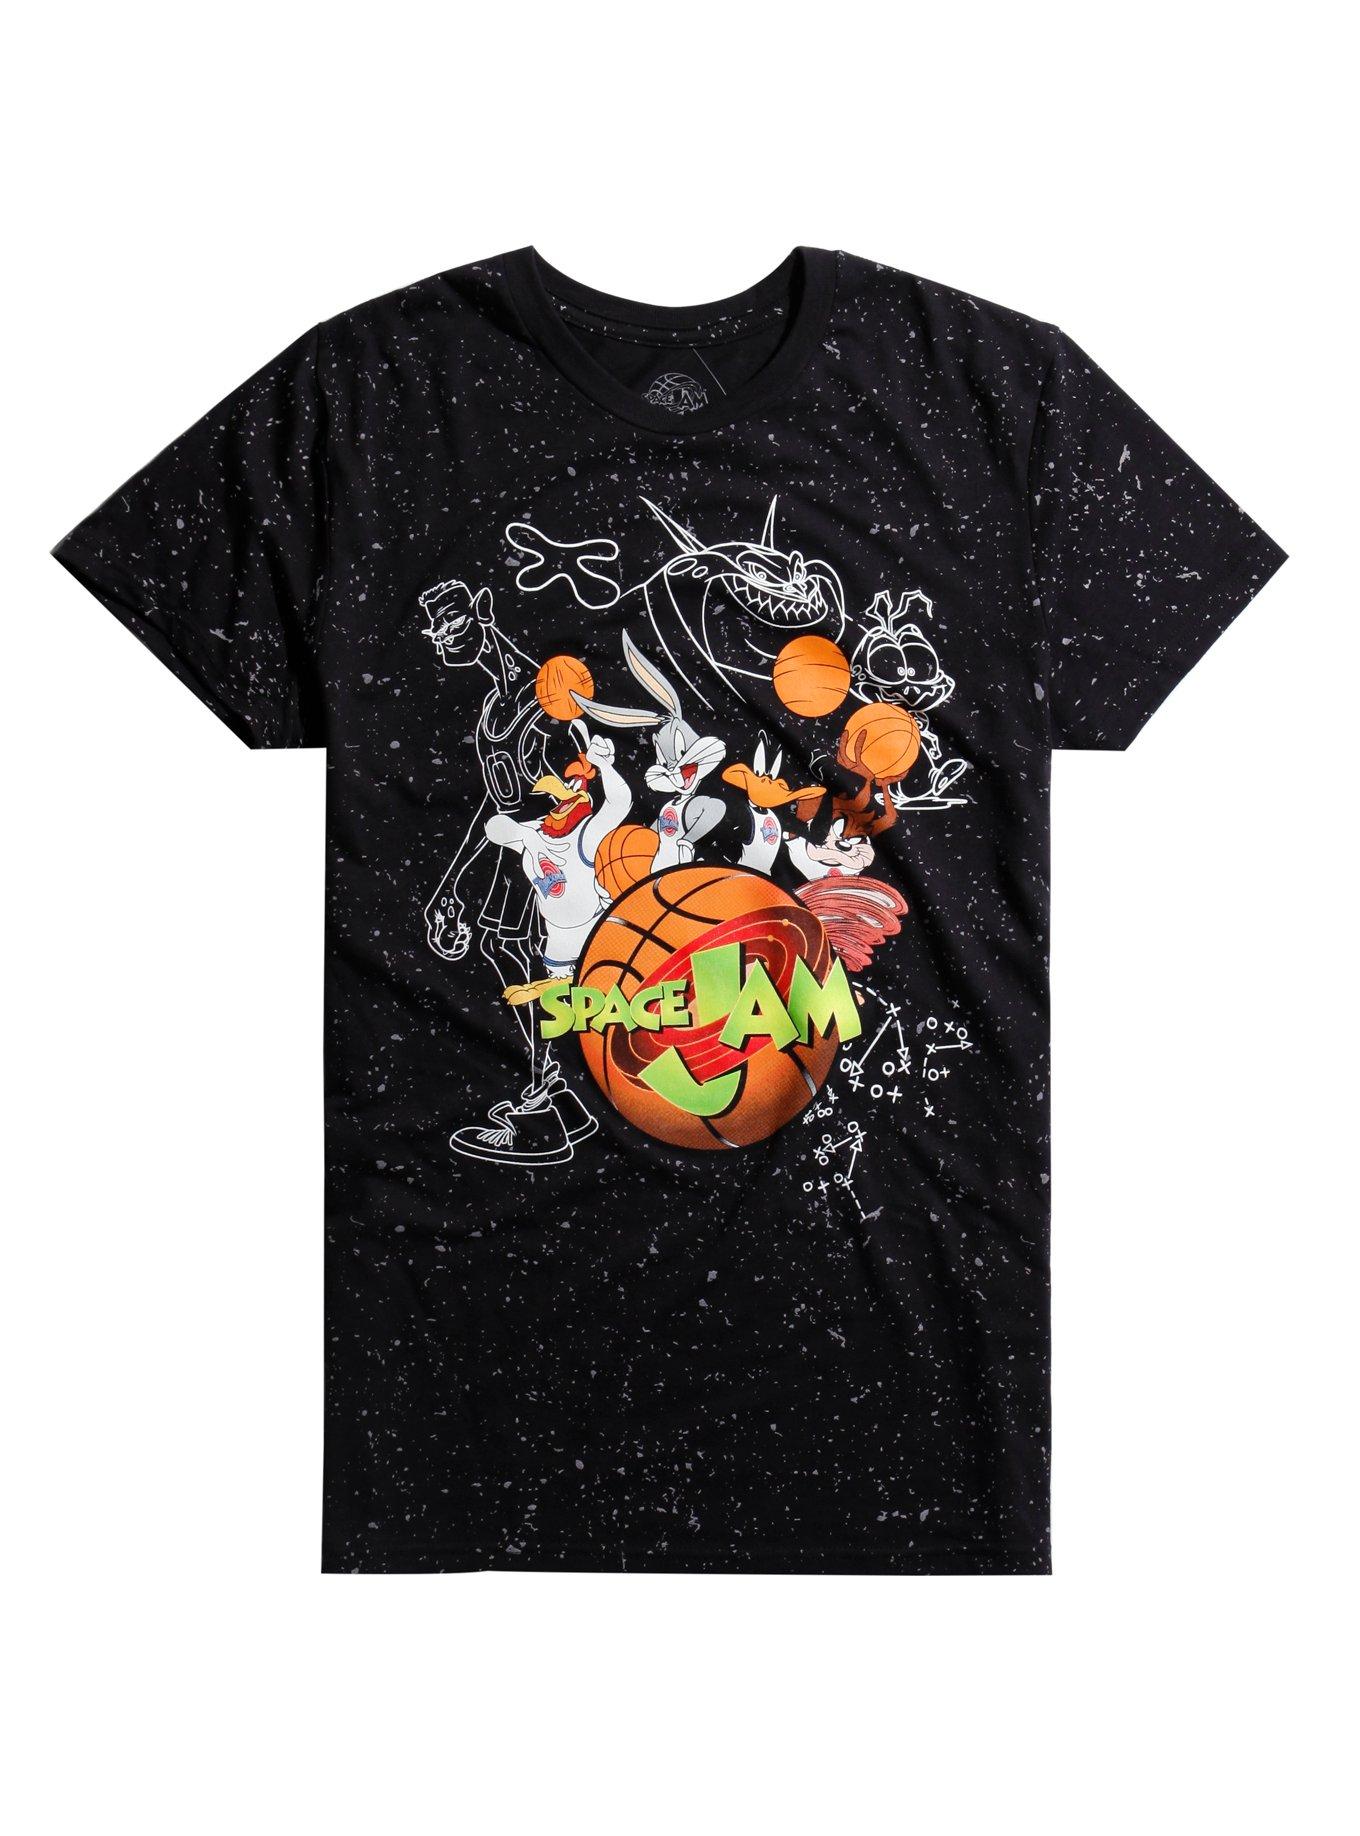 Space Jam Tune Squad T-Shirt, Official Space Jam Merch